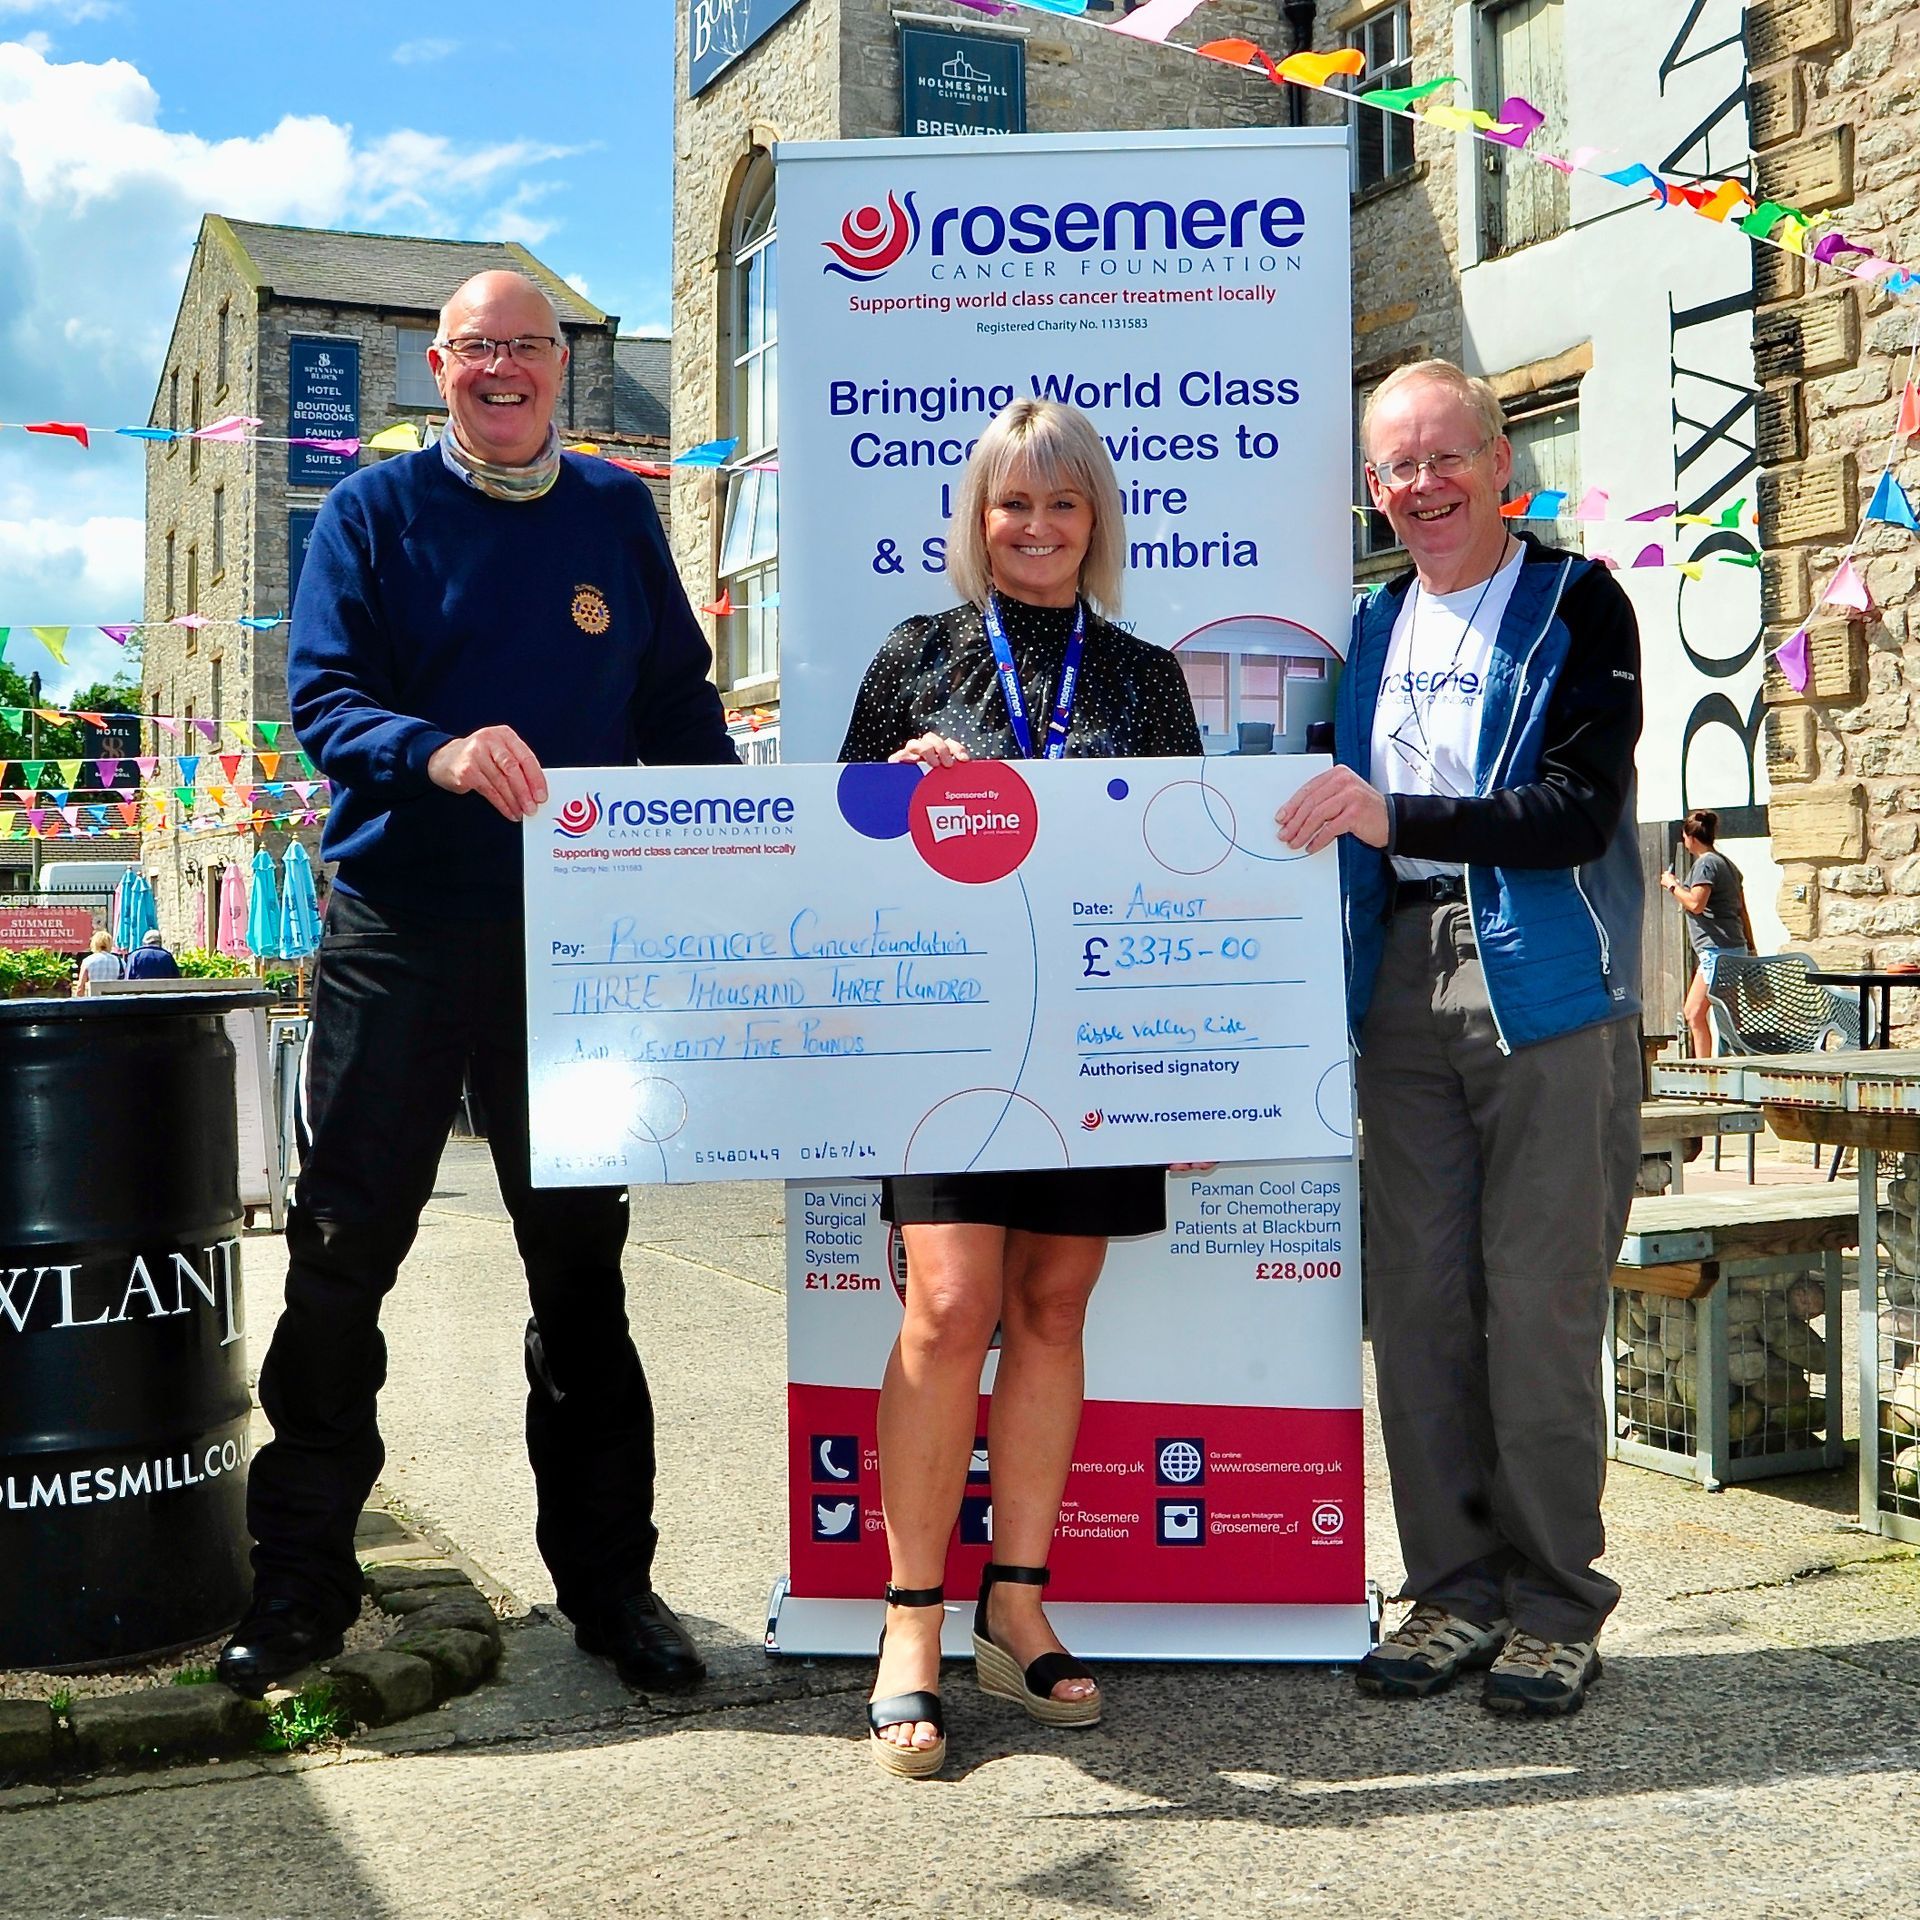 Ribble Valley Ride organisers John Spencer (left) and Bill Honeywell (right) hand over a cheque for £3,375 to Rosemere Cancer Foundation fundraising manager Sue Swire. Image © Mark Sutcliffe/Salar Media